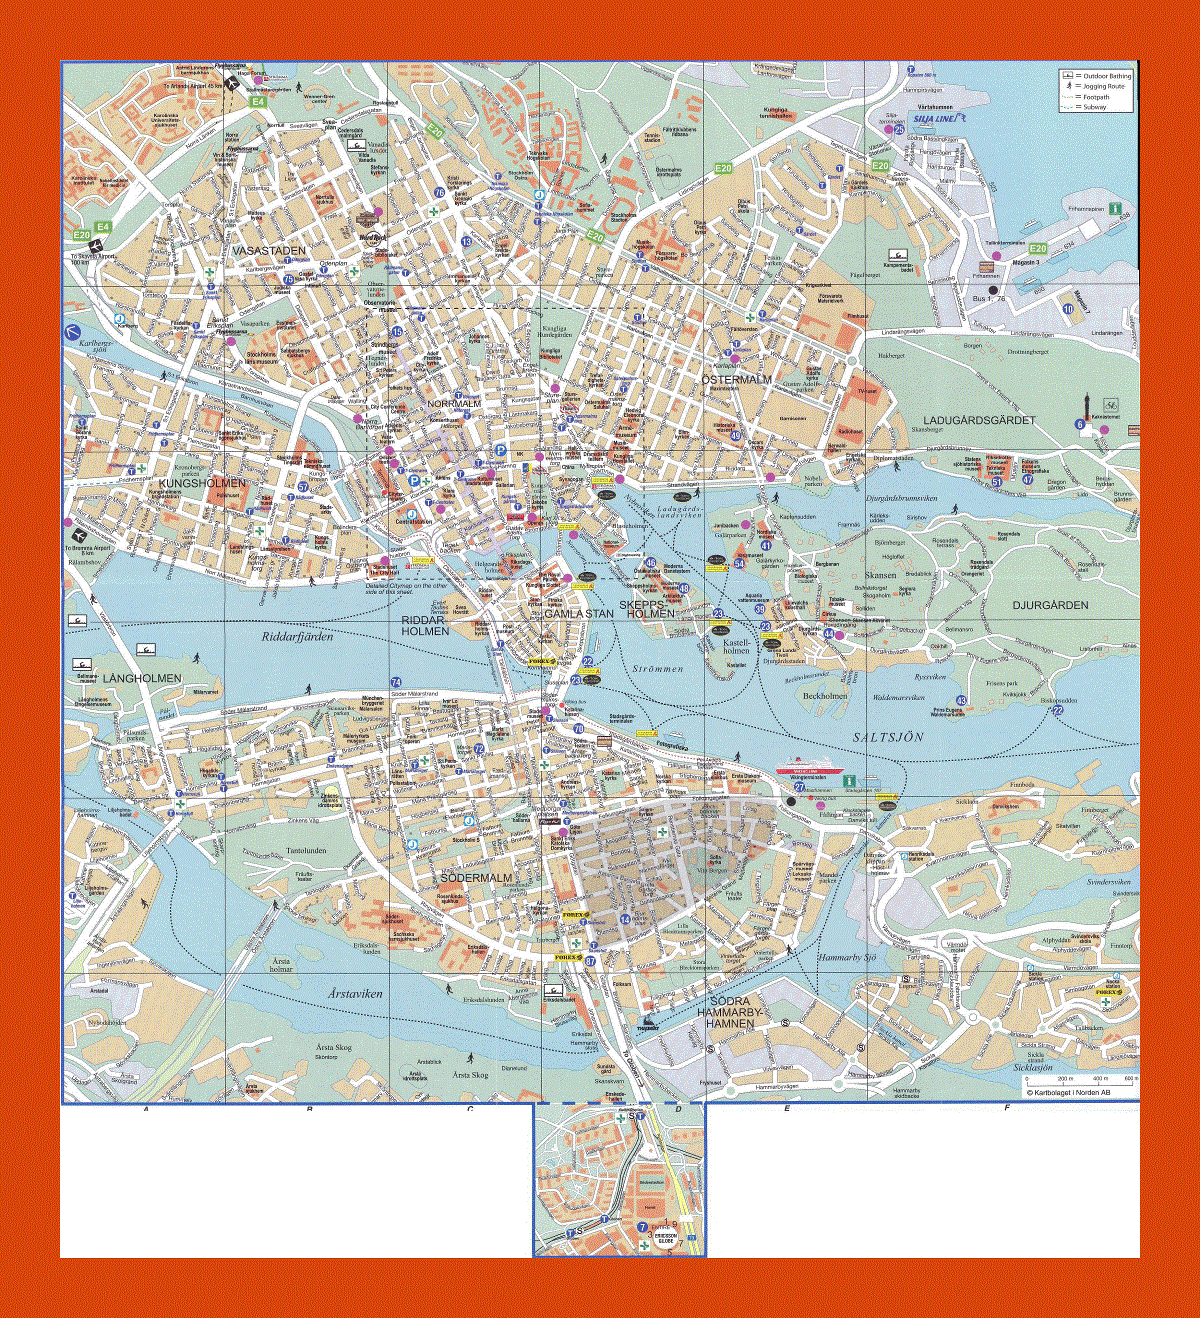 Overall map of Stockholm city